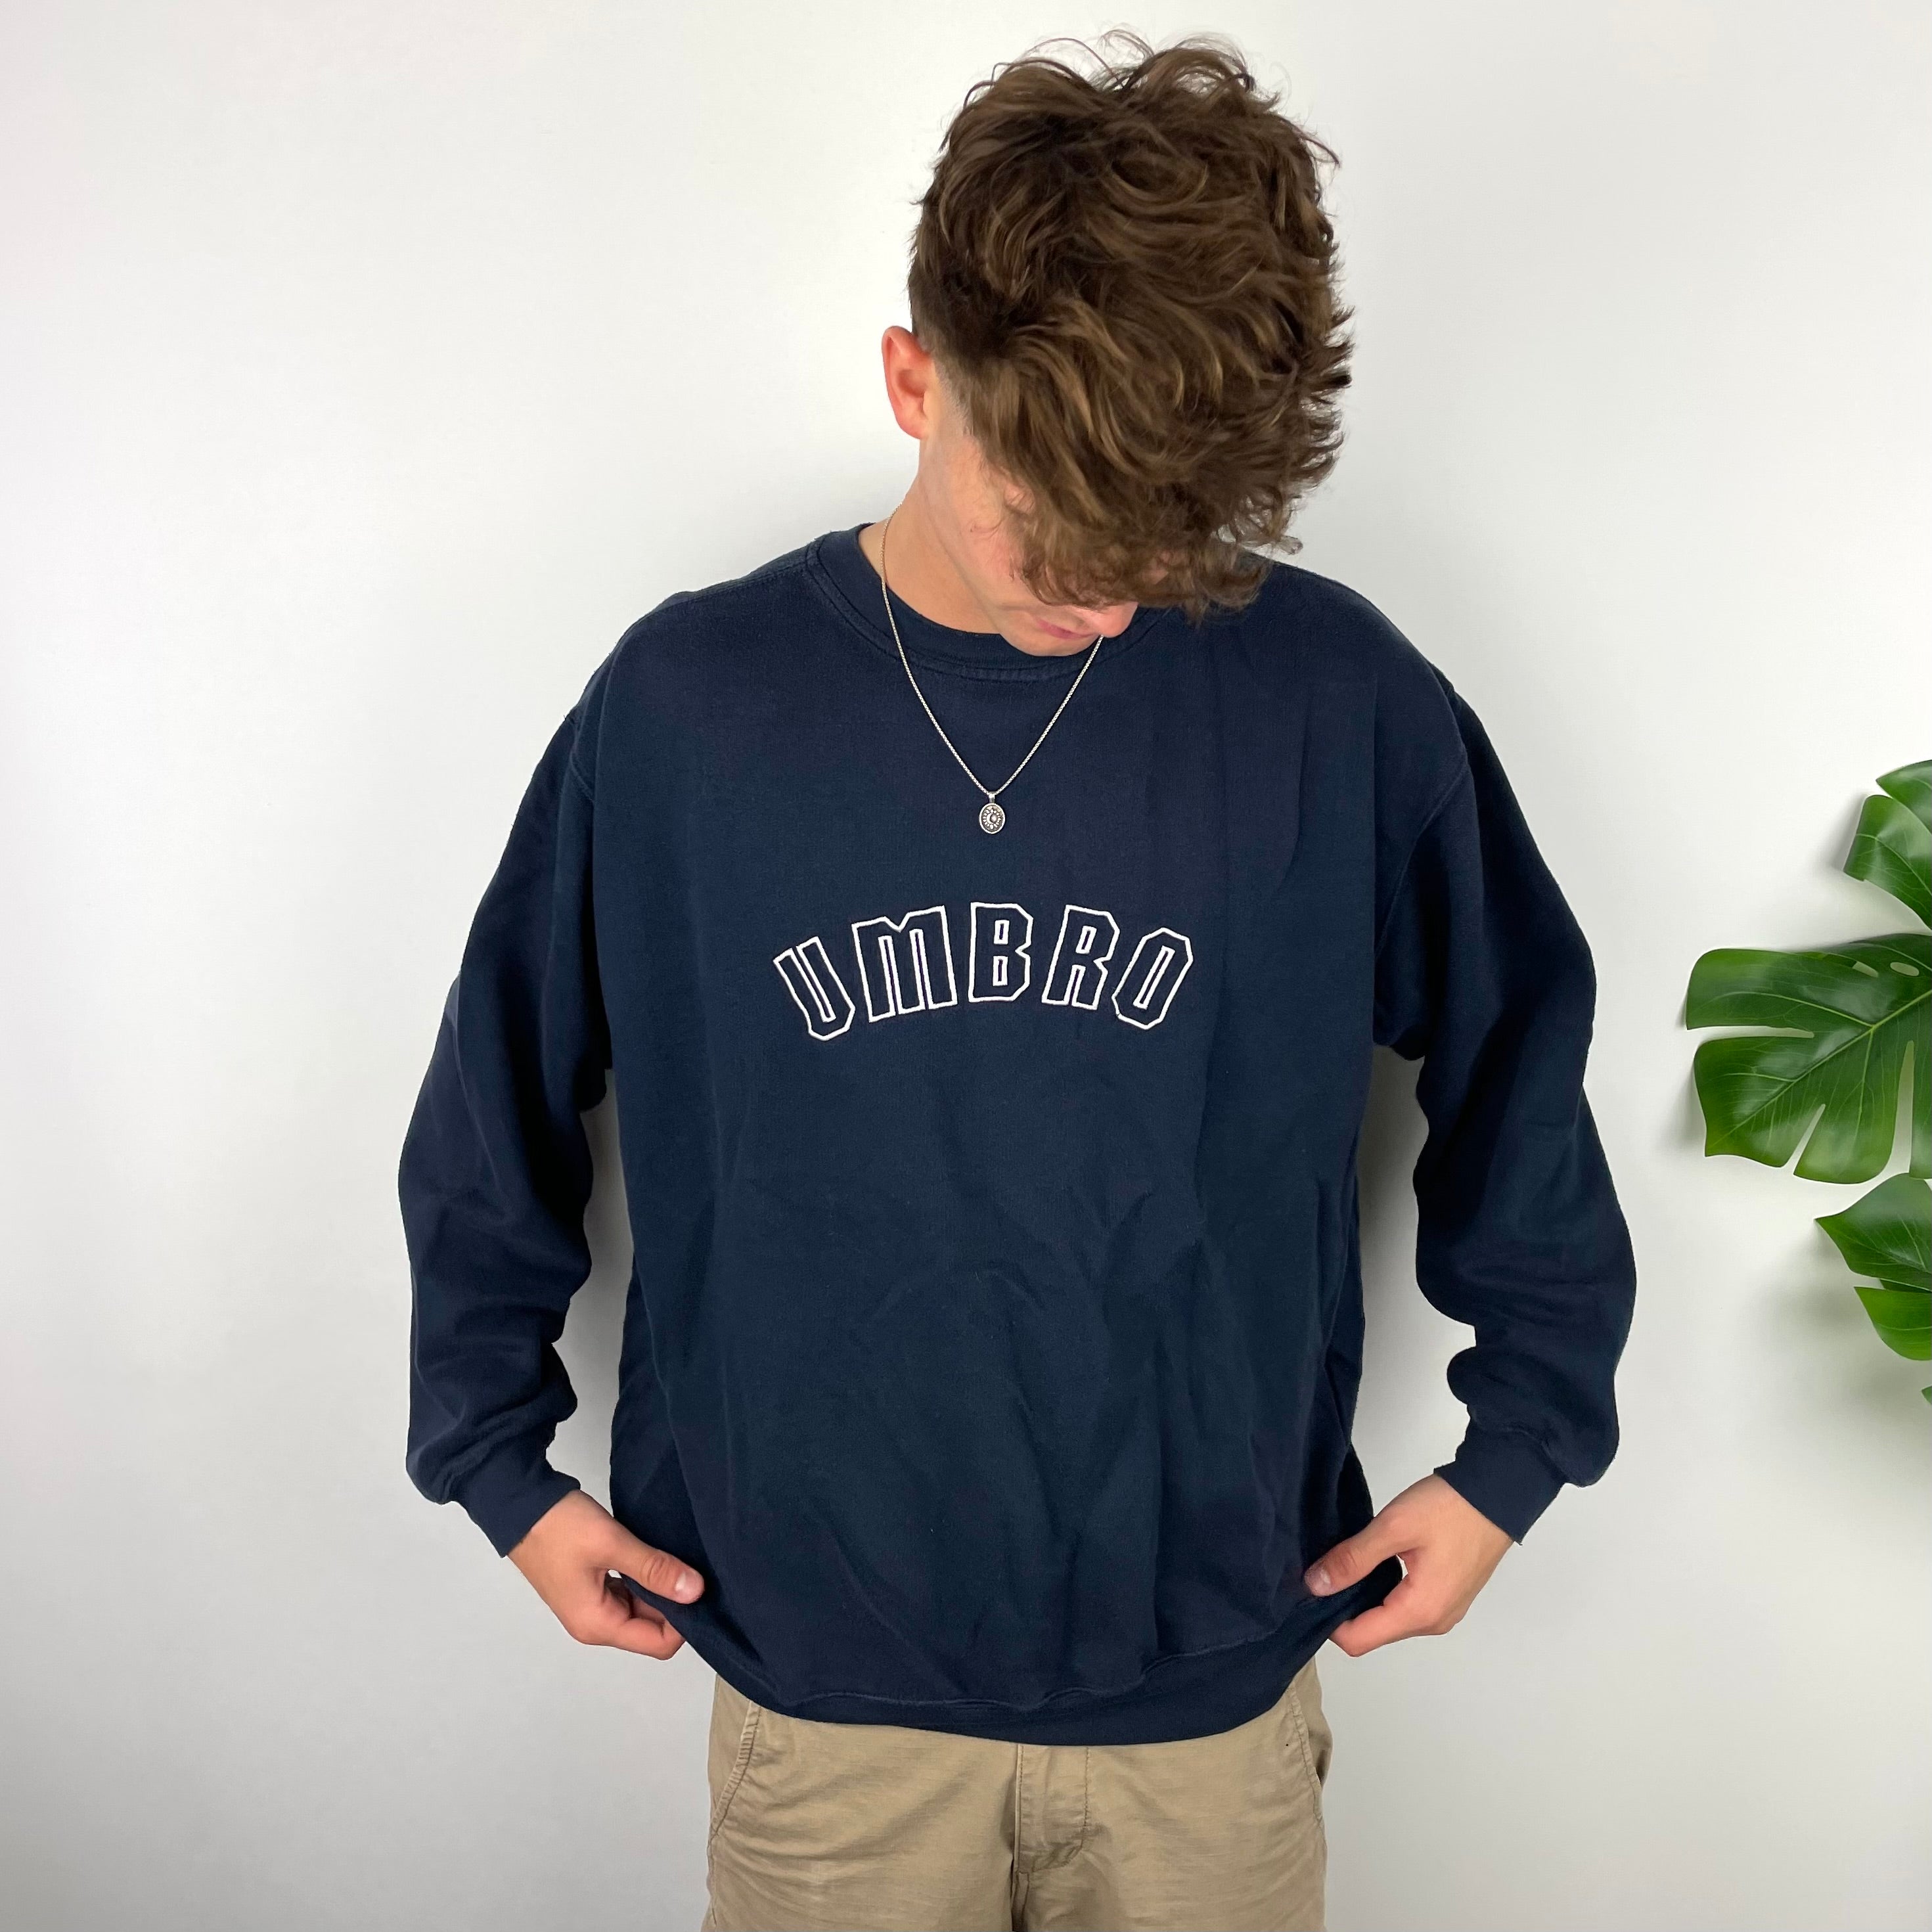 Umbro RARE Navy Embroidered Spell Out Sweatshirt (XL)